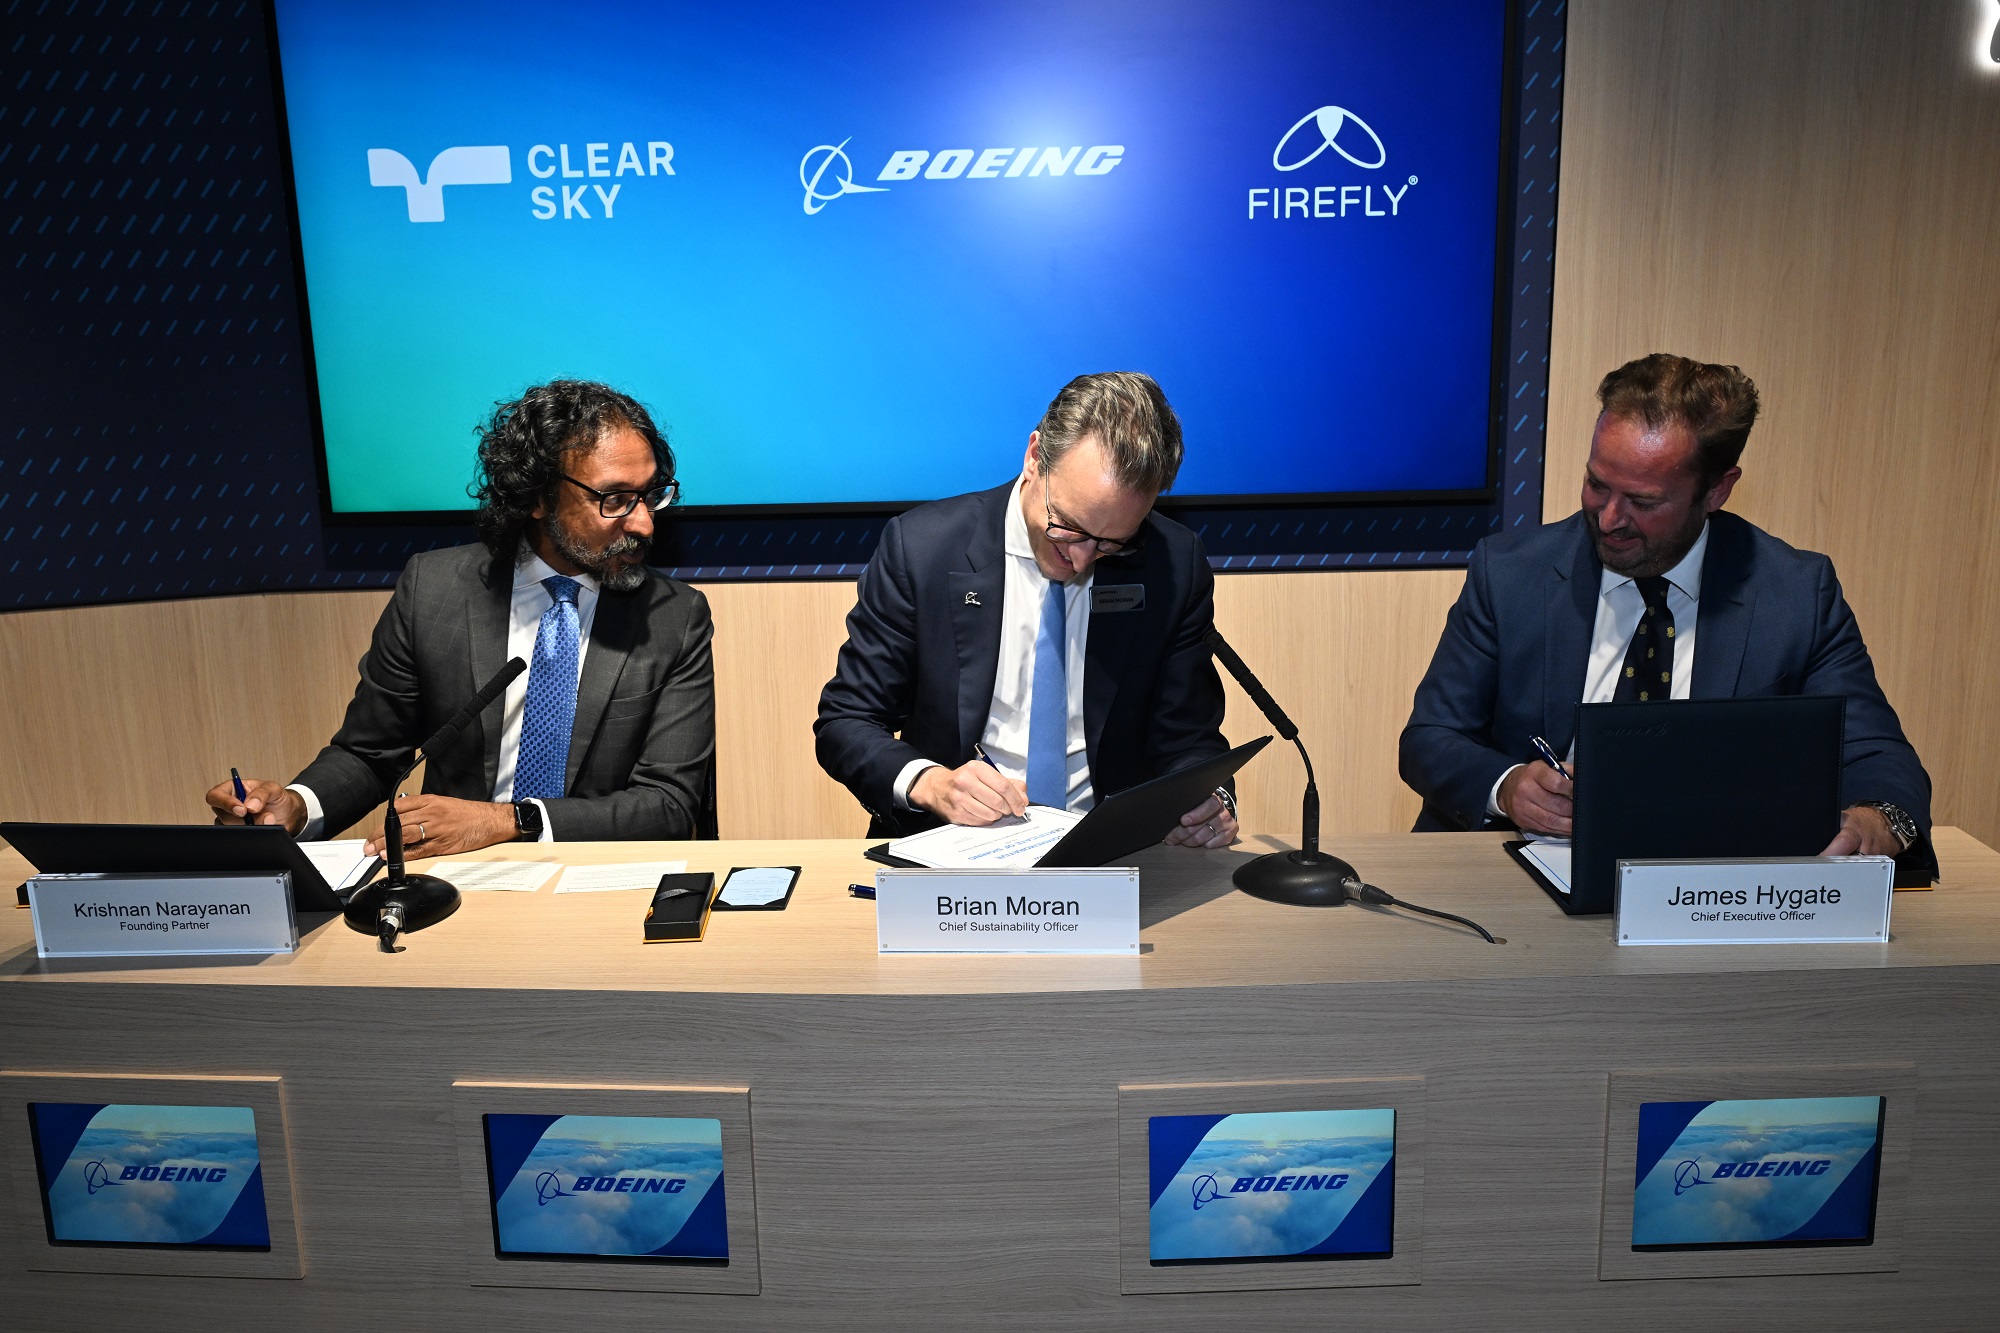 Boeing and Clear Sky partner on decarbonising aviation